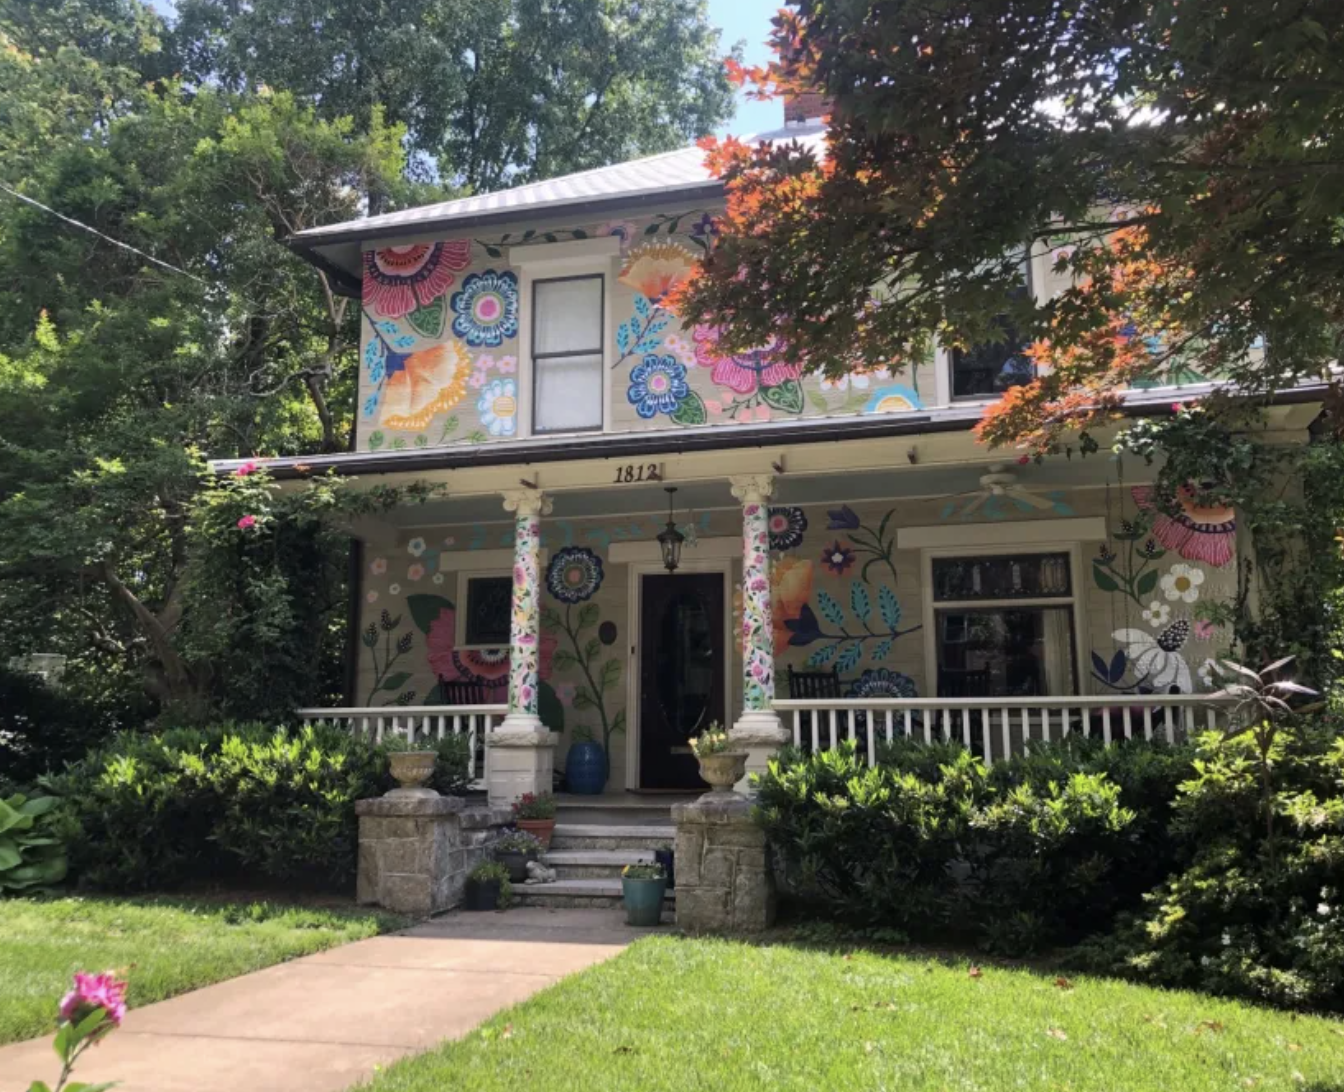 “It’s amazing!” Two-story mural on Charlotte’s home reminding people to pause and just be happy